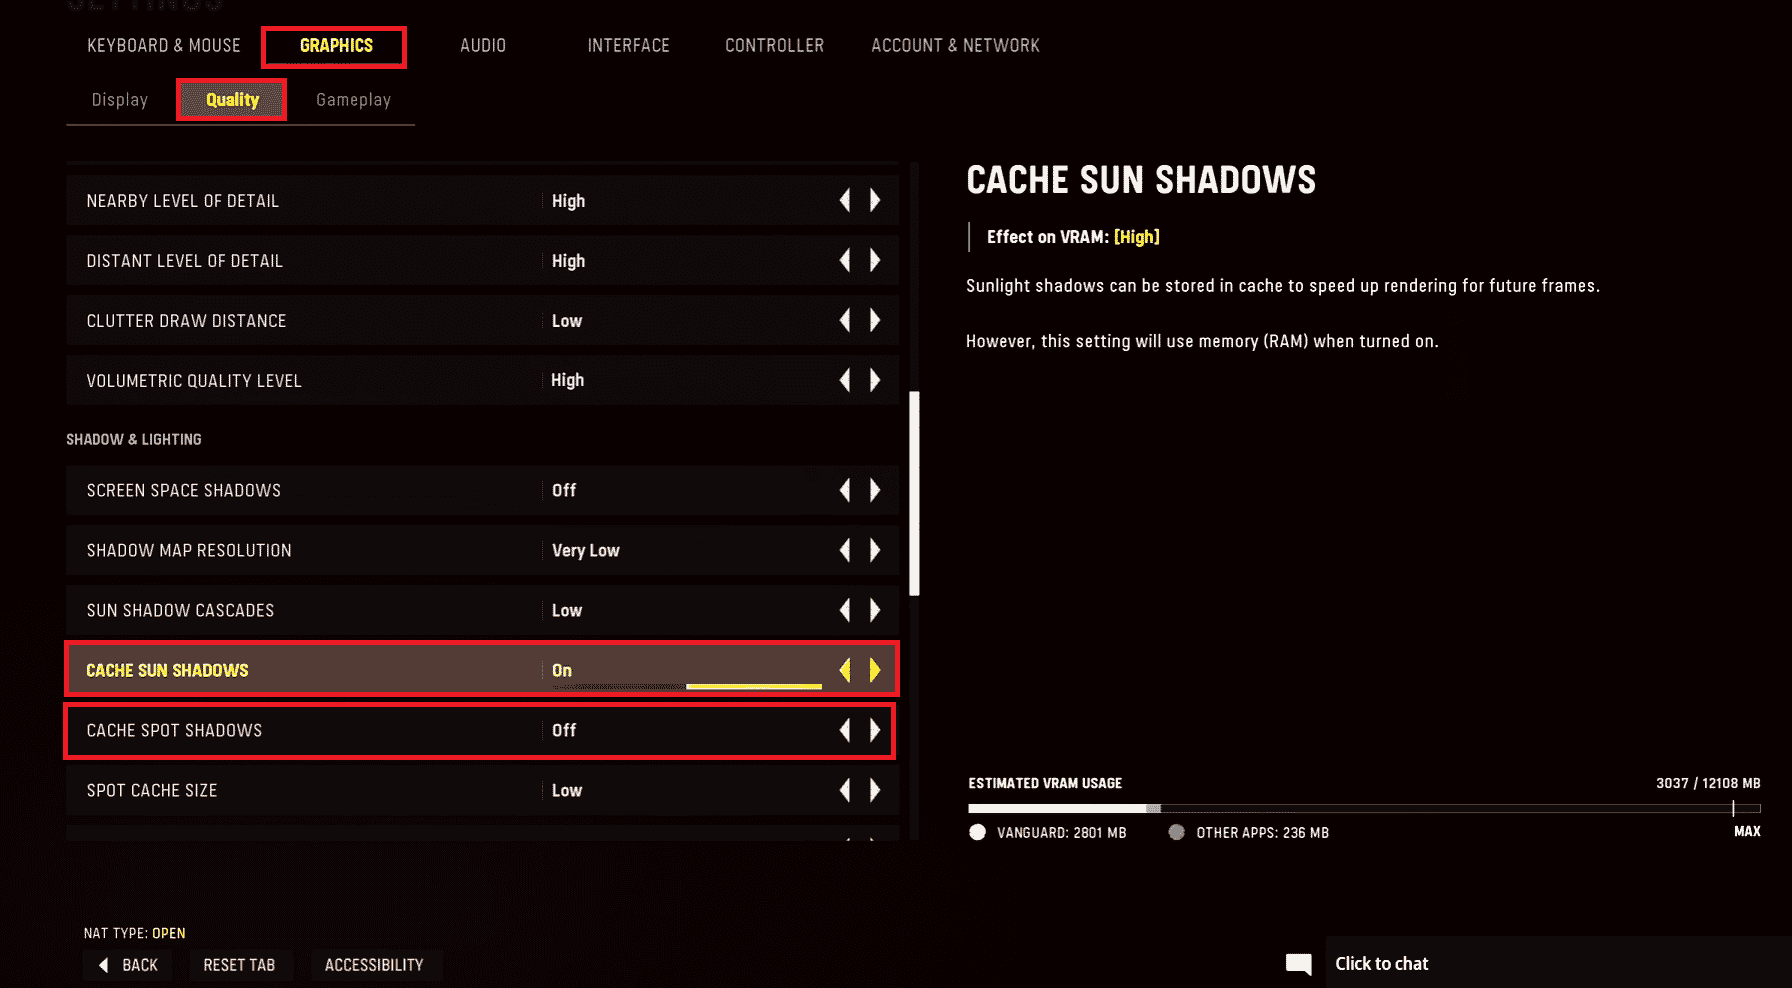 turn off cache spot shadows and cache sun shadows in COD Vanguard game graphics quality setting